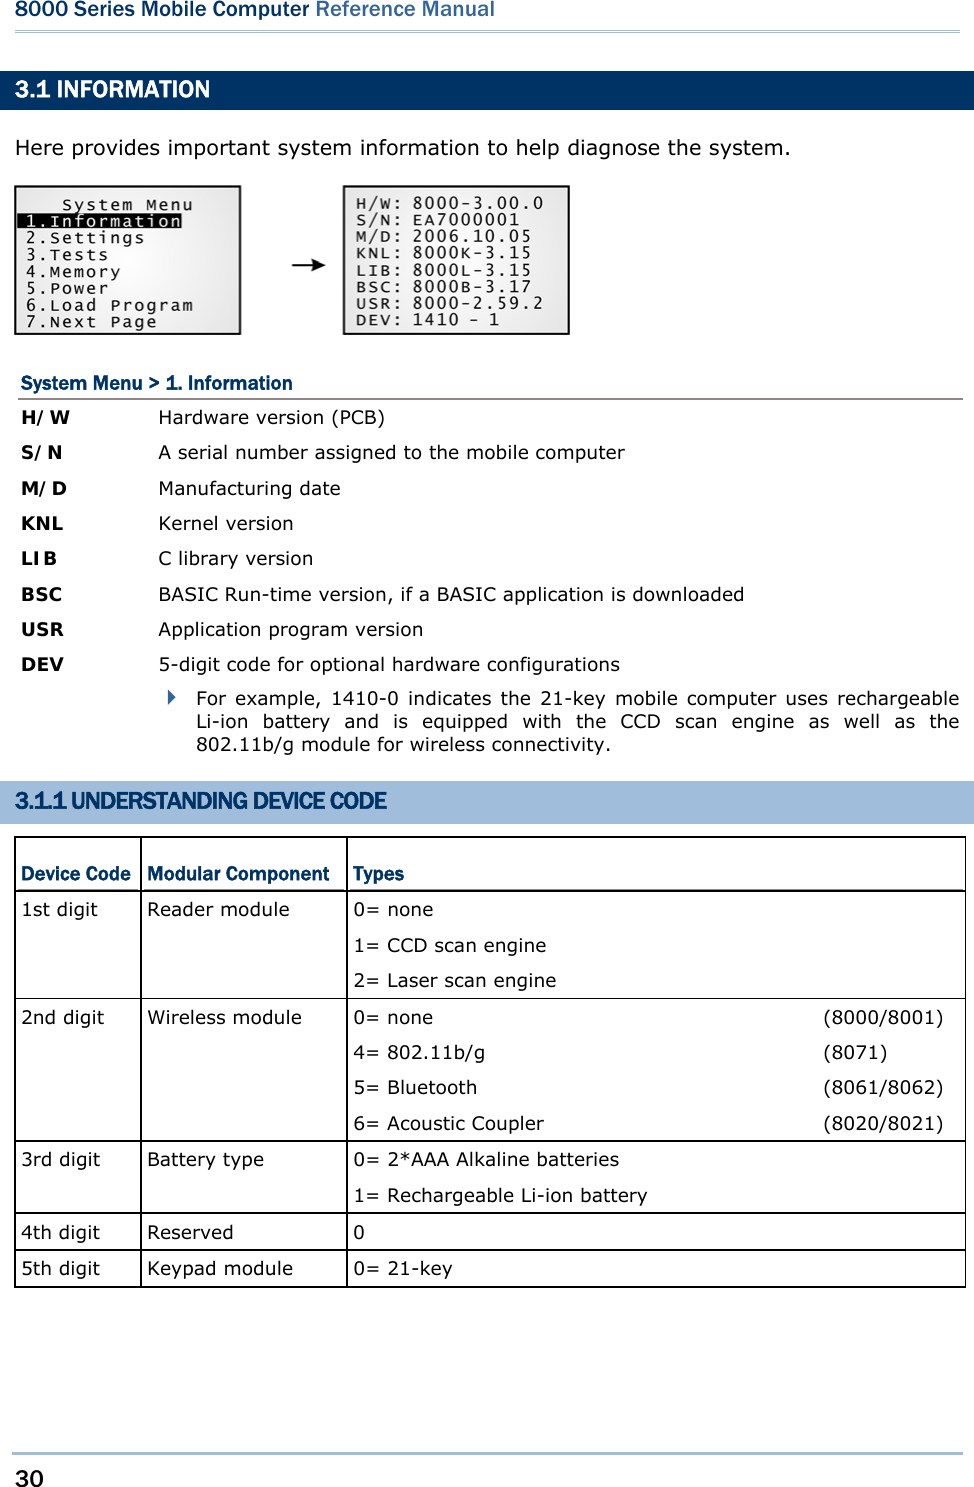 30  8000 Series Mobile Computer Reference Manual  3.1 INFORMATION Here provides important system information to help diagnose the system.    System Menu &gt; 1. Information H/W Hardware version (PCB) S/N  A serial number assigned to the mobile computer M/D  Manufacturing date KNL  Kernel version LIB  BSC C library version   BASIC Run-time version, if a BASIC application is downloaded USR  Application program version DEV  5-digit code for optional hardware configurations  For example, 1410-0 indicates the 21-key mobile computer uses rechargeable Li-ion battery and is equipped with the CCD scan engine as well as the 802.11b/g module for wireless connectivity.  3.1.1 UNDERSTANDING DEVICE CODE Device Code  Modular Component  Types 1st digit  Reader module  0= none 1= CCD scan engine   2= Laser scan engine   2nd digit  Wireless module  0= none 4= 802.11b/g 5= Bluetooth 6= Acoustic Coupler (8000/8001) (8071) (8061/8062) (8020/8021) 3rd digit  Battery type  0= 2*AAA Alkaline batteries 1= Rechargeable Li-ion battery 4th digit  Reserved  0 5th digit  Keypad module  0= 21-key    